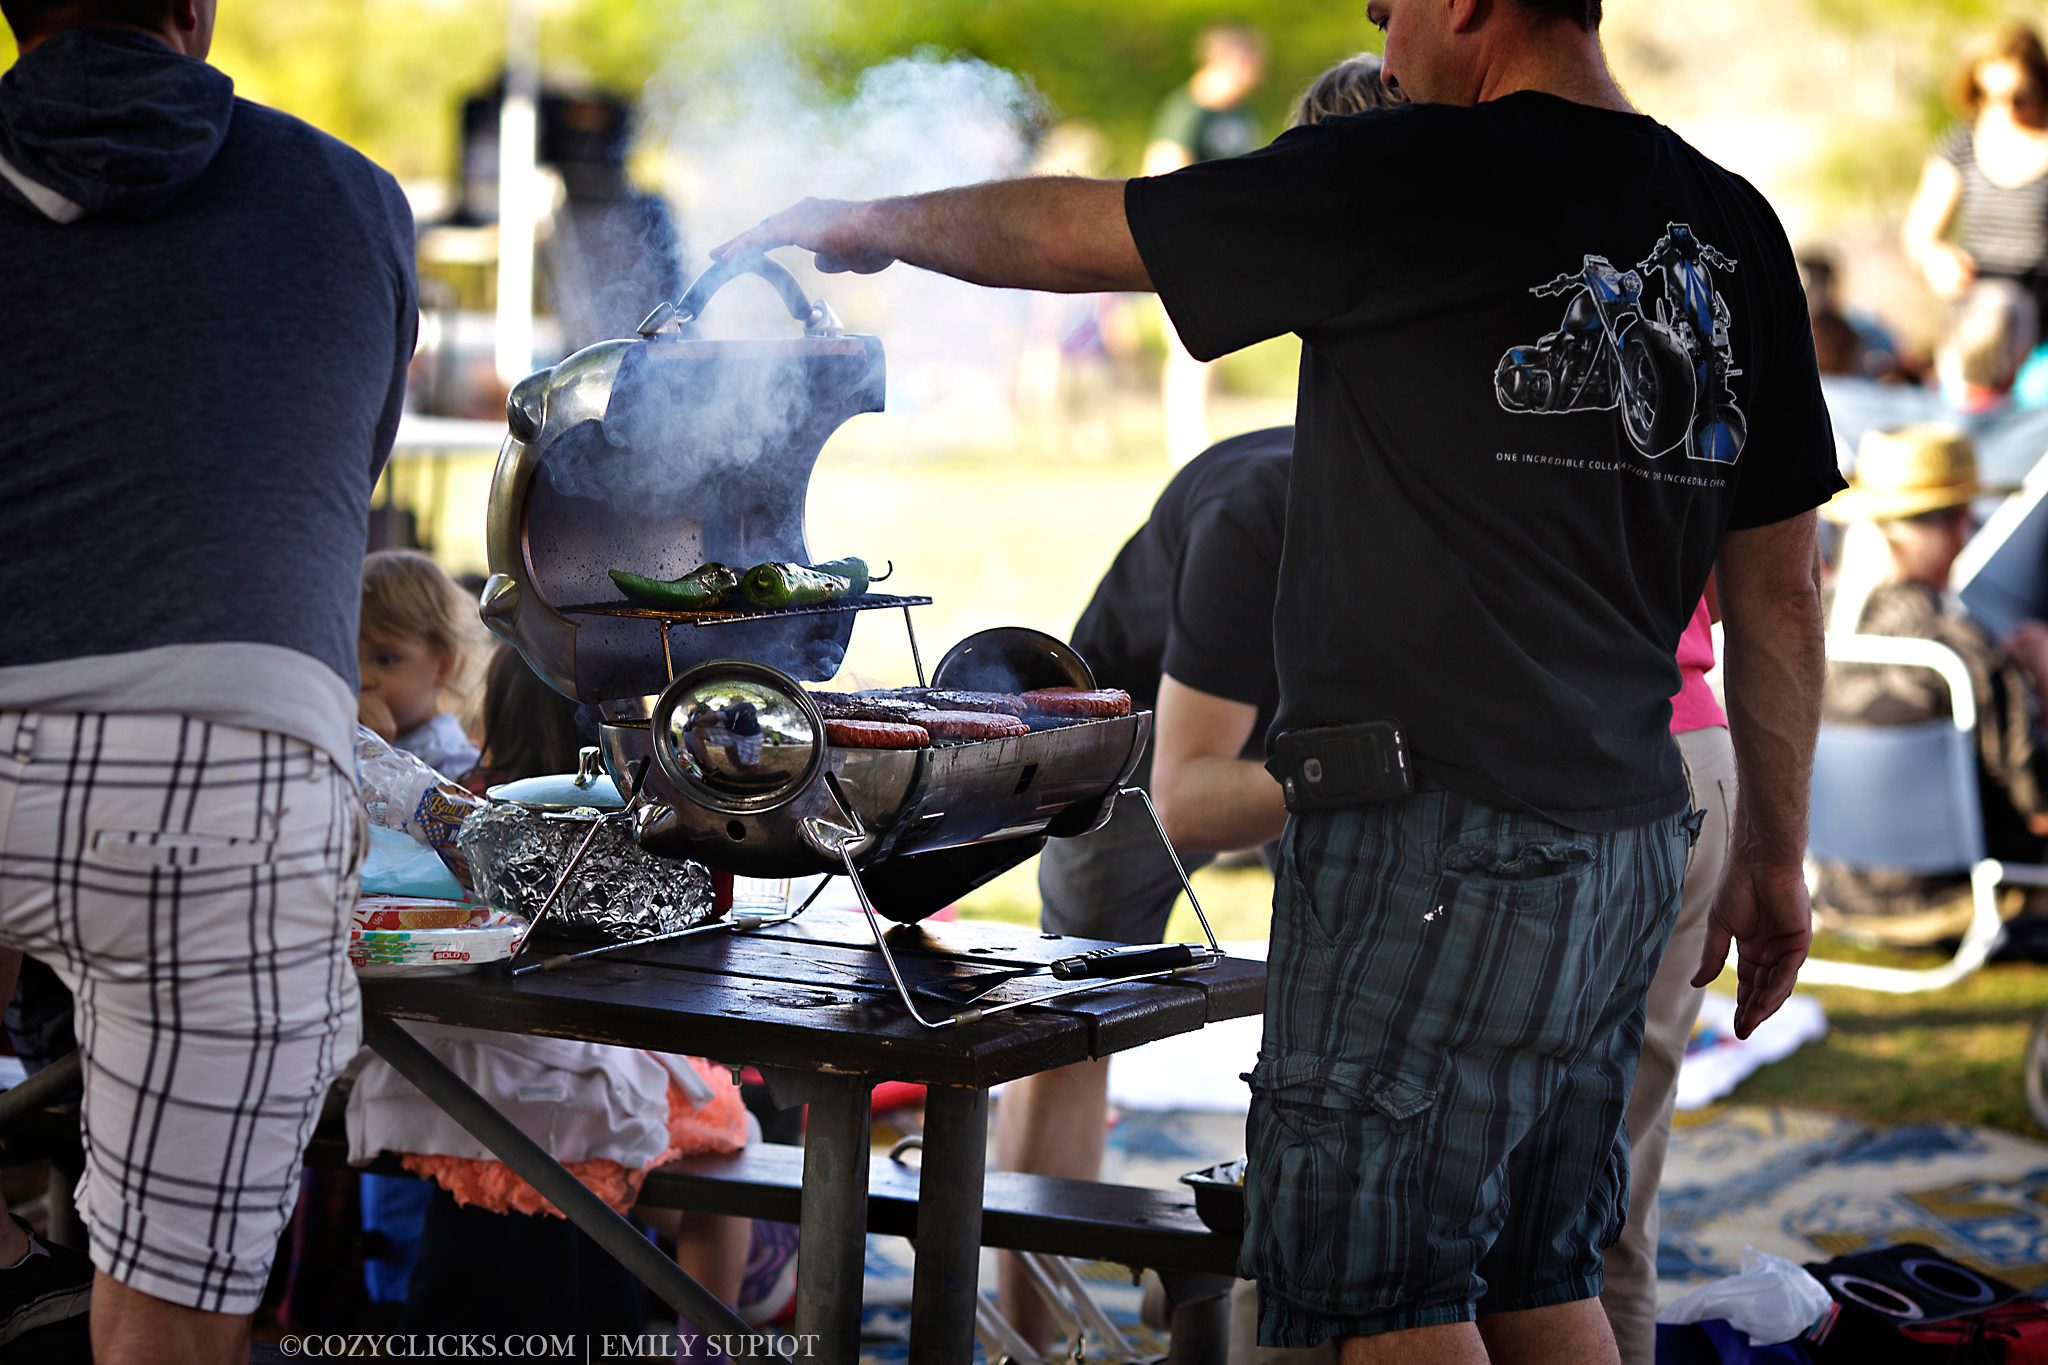 Family grilling at the Ahwatukee concerts